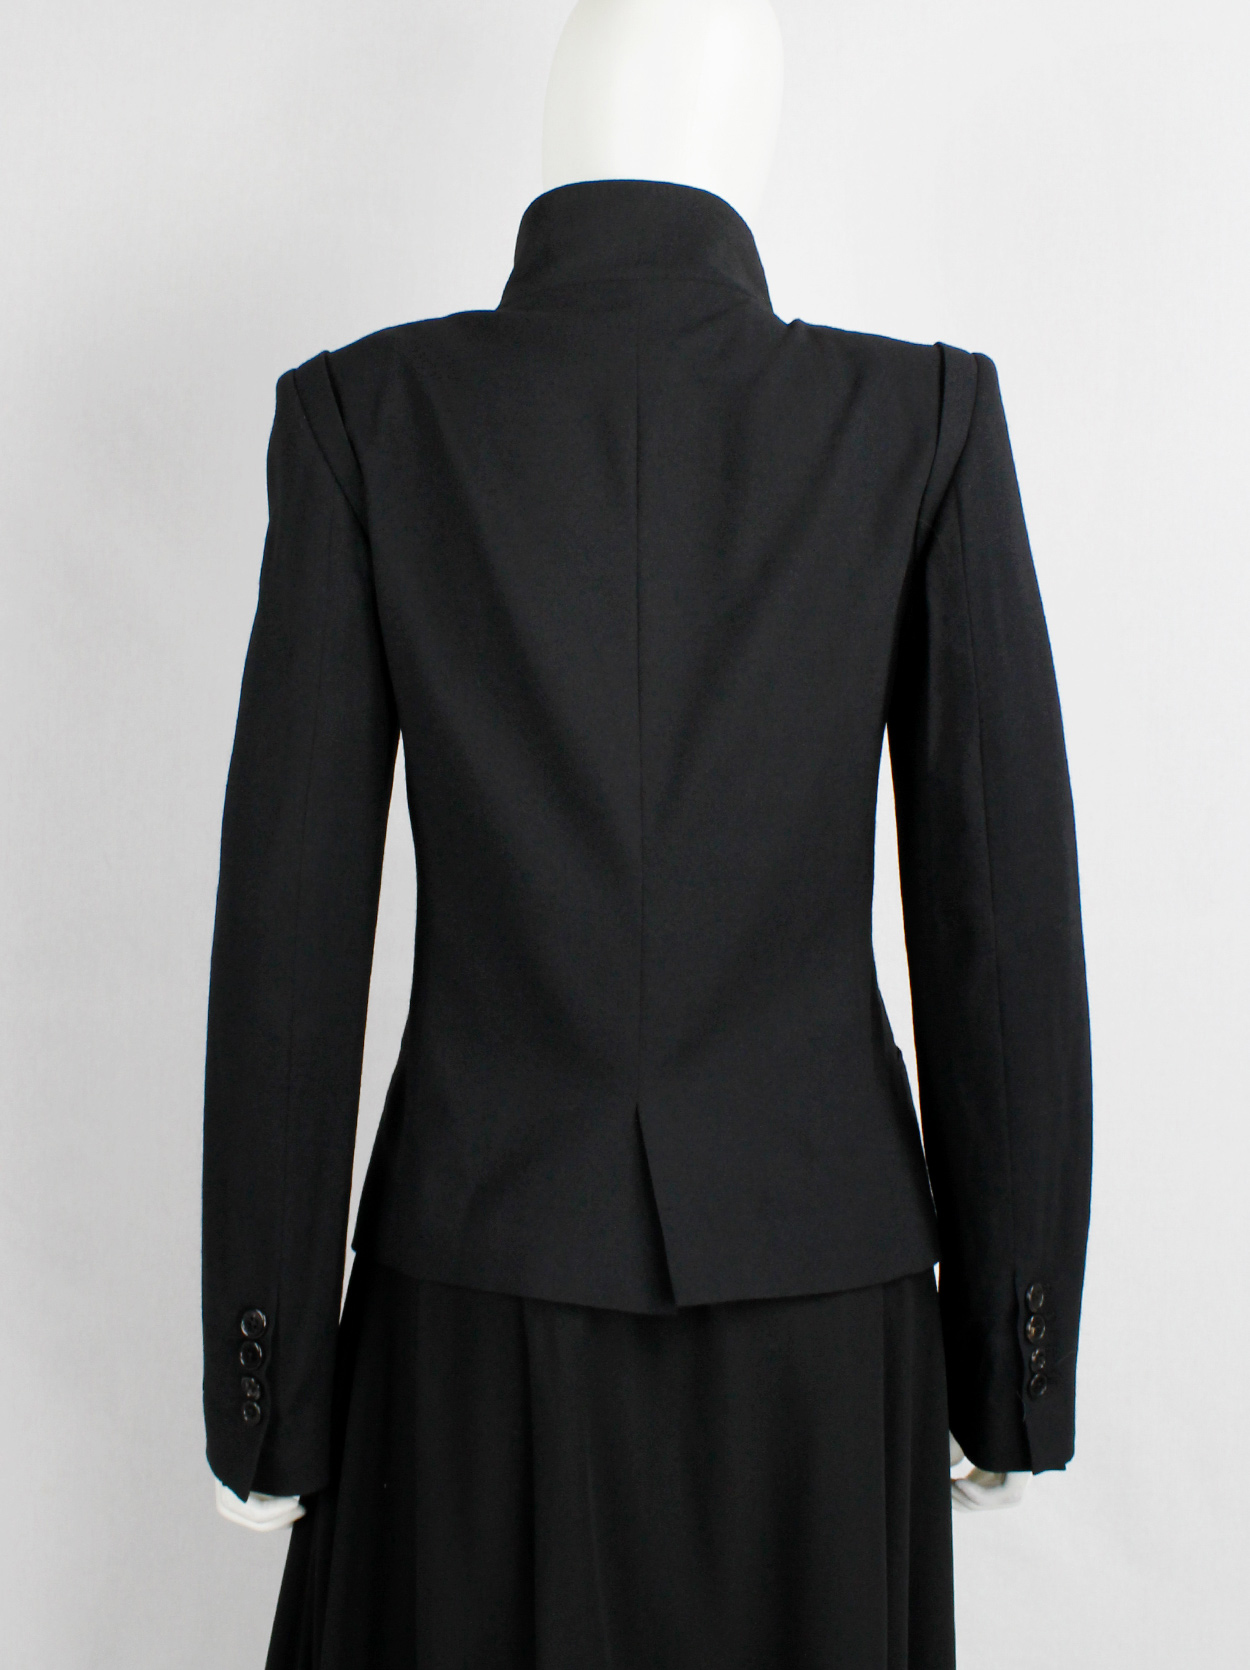 Ann Demeulemeester black double breasted jacket with front panel slit ...